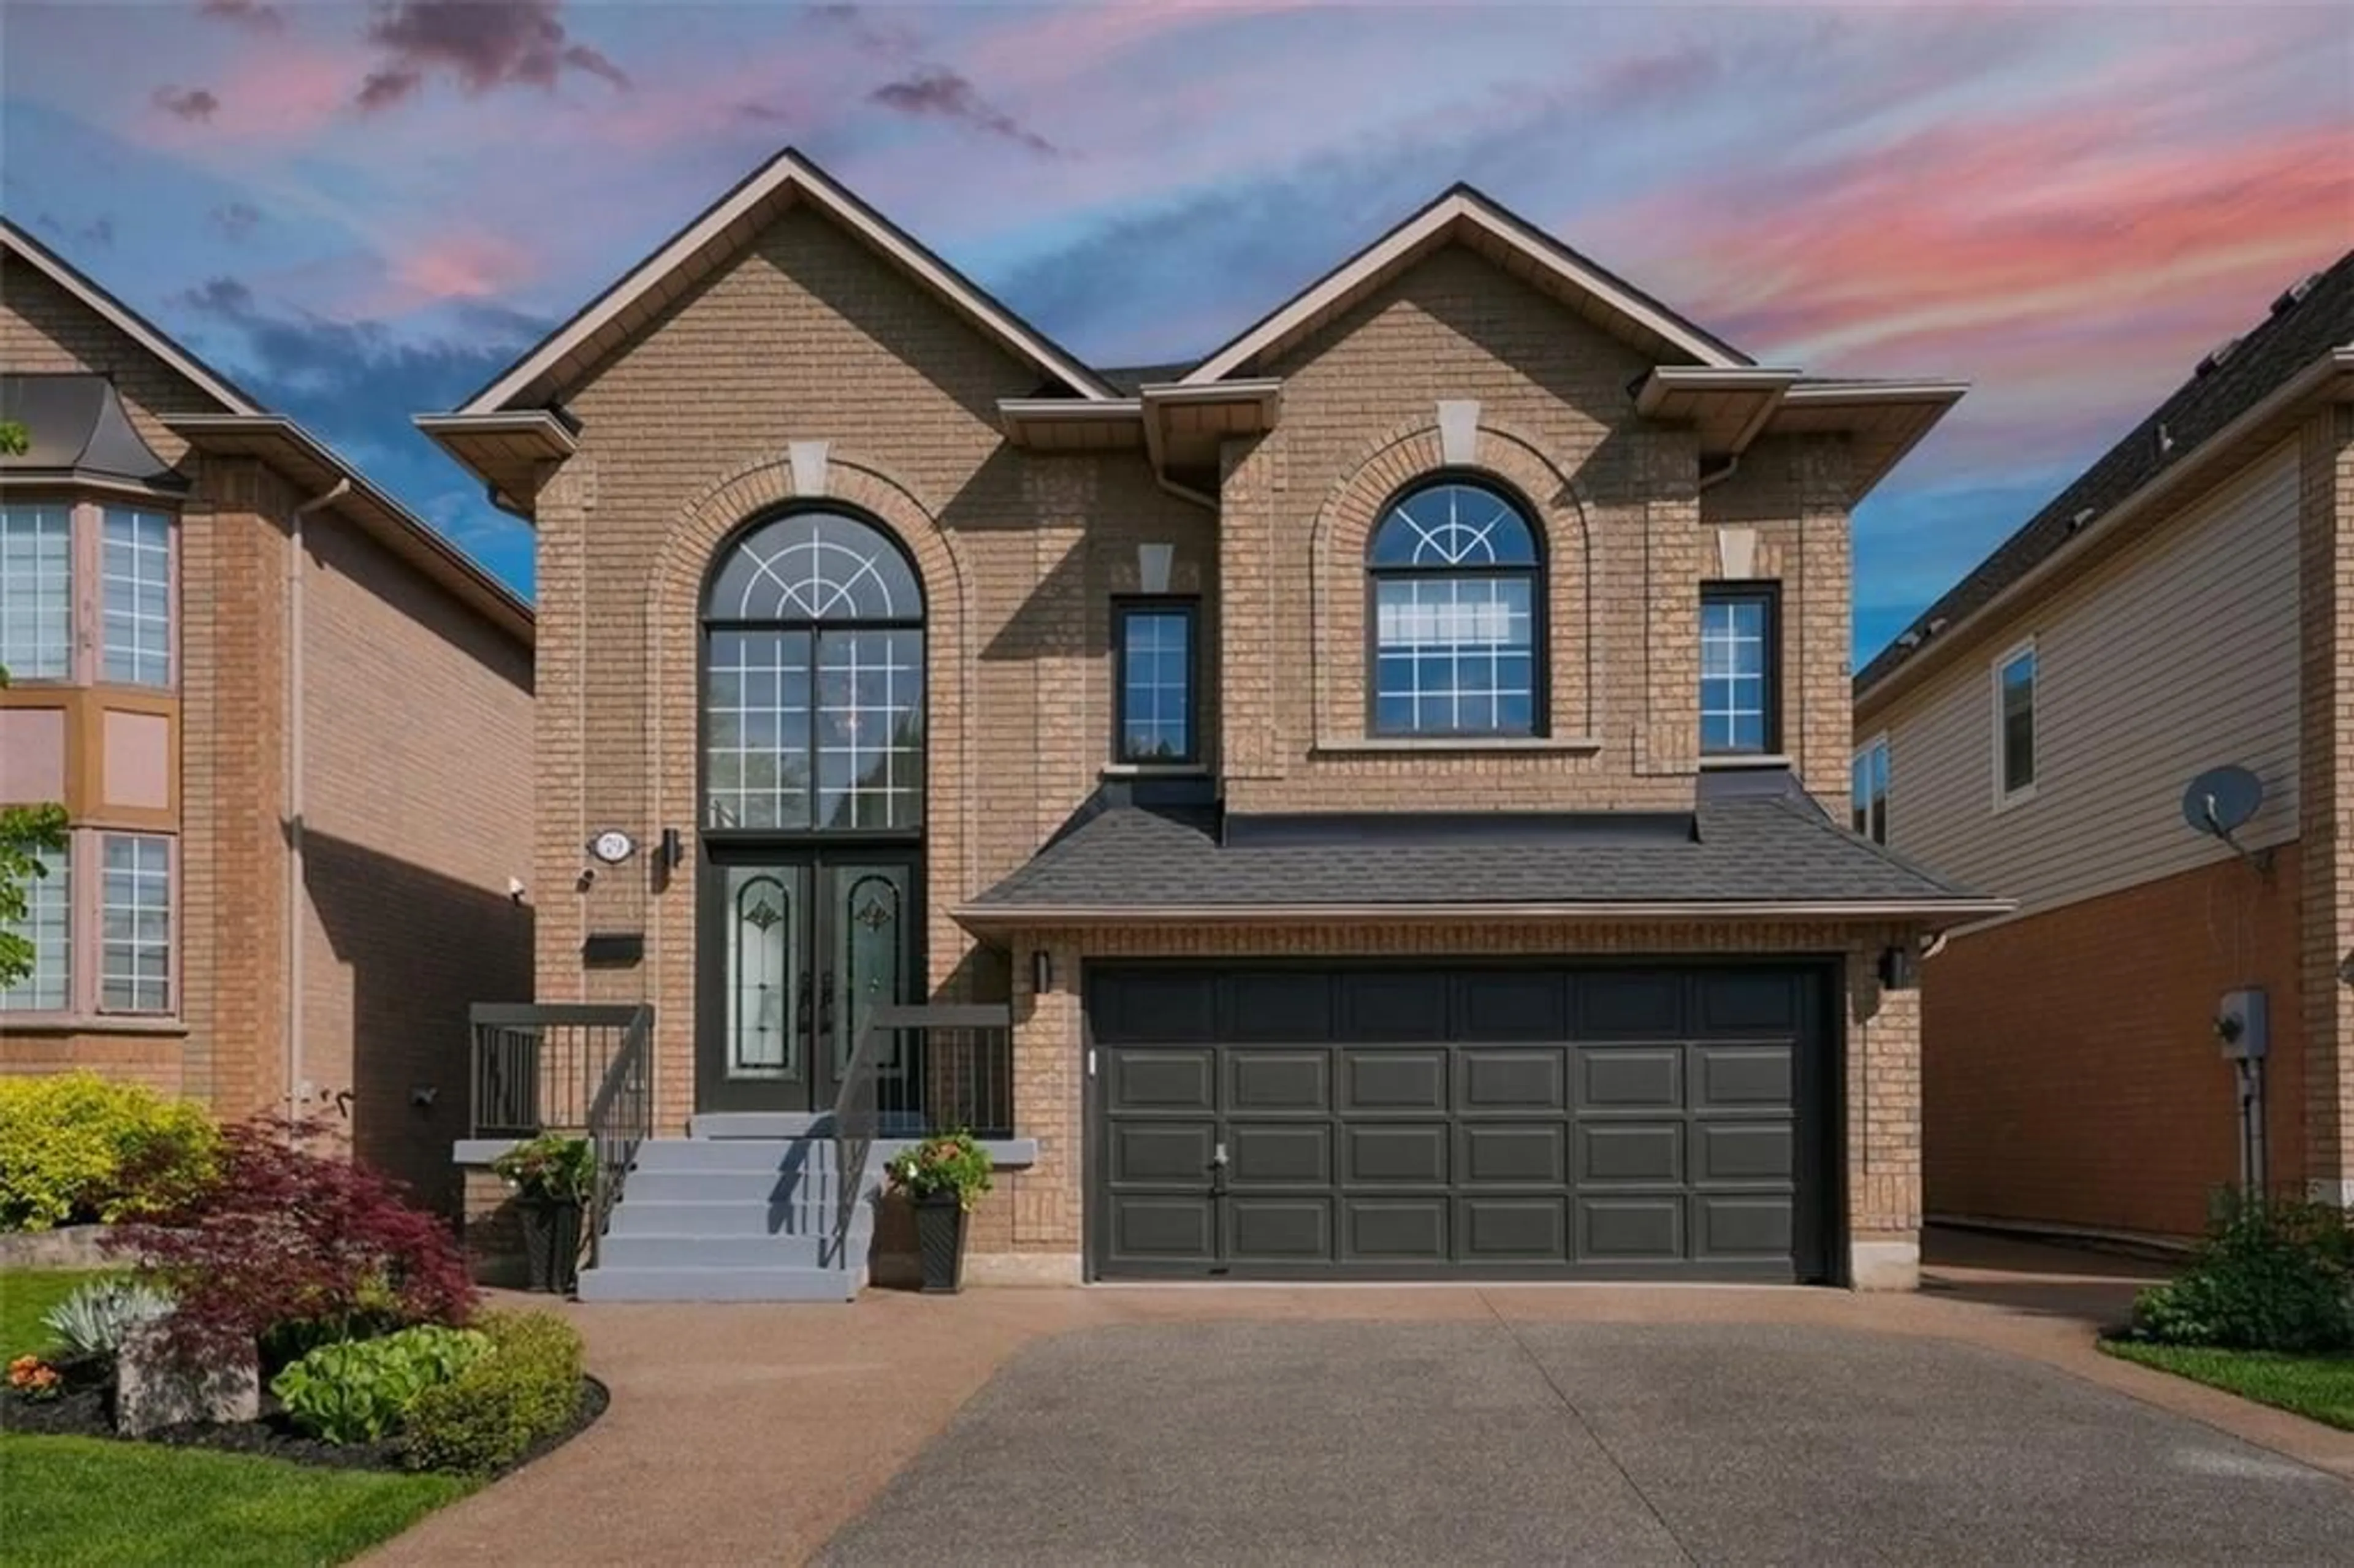 Home with brick exterior material for 79 ROCKHAVEN Lane, Waterdown Ontario L0R 2H6